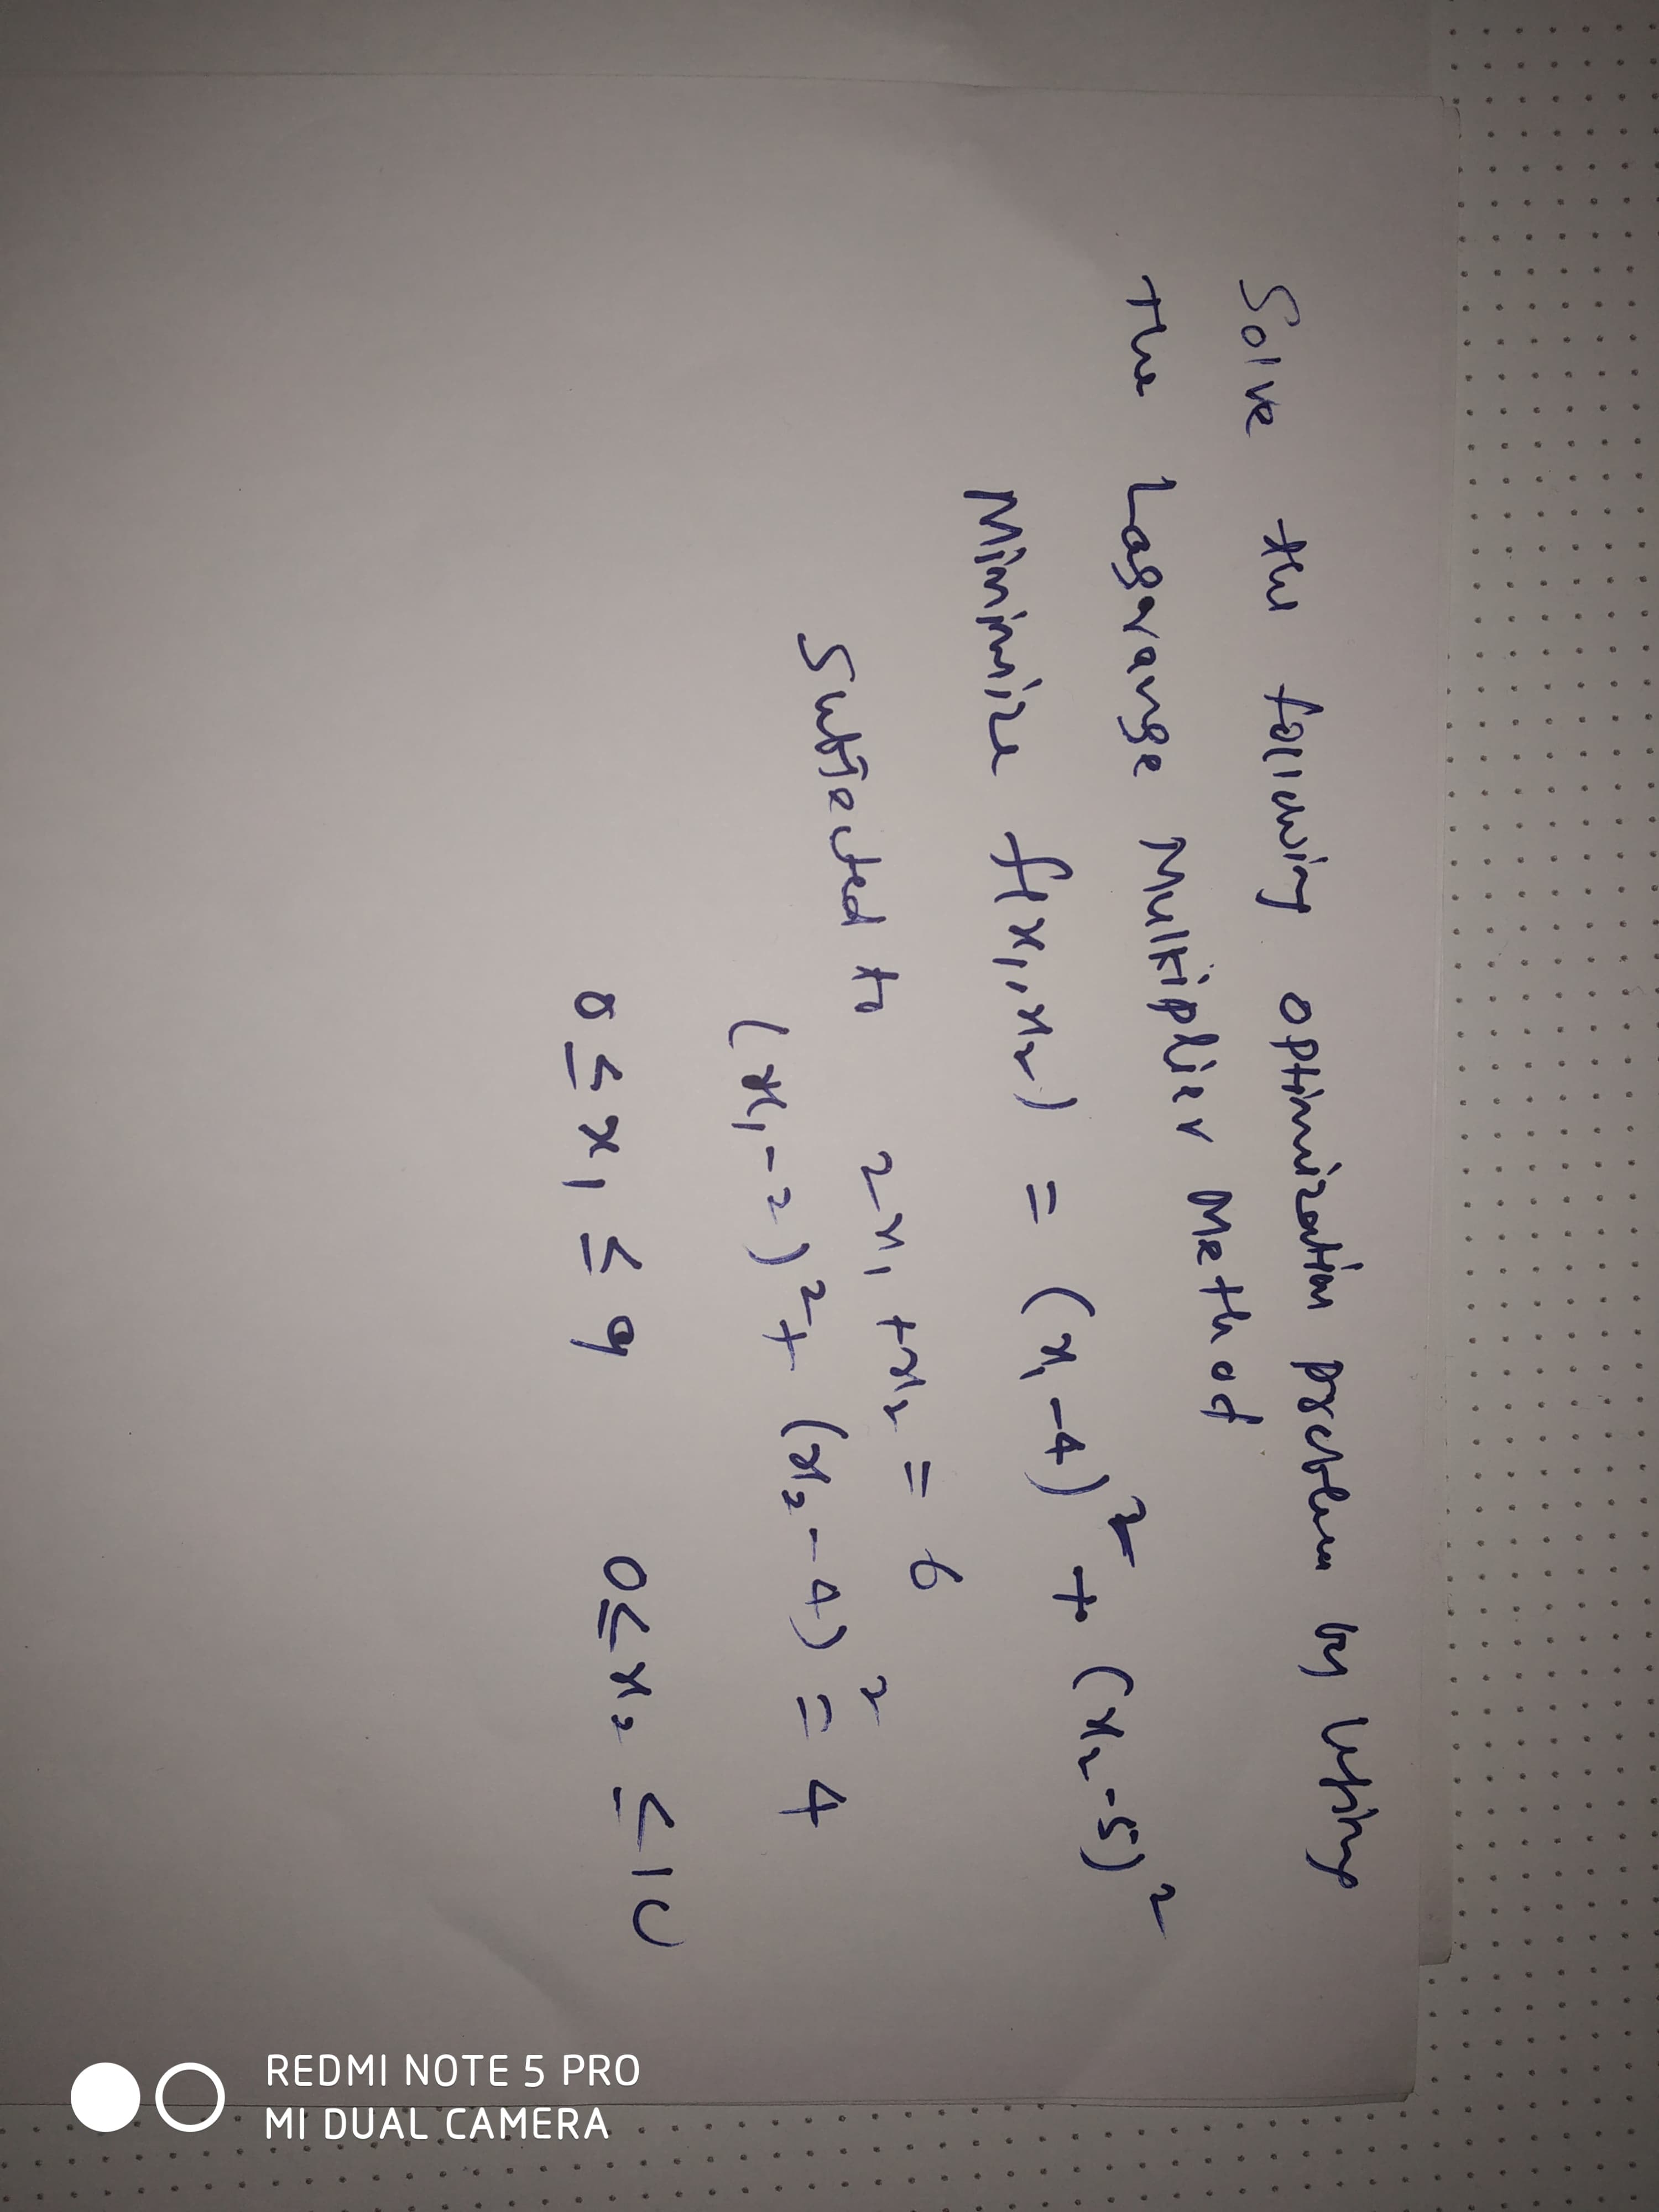 Solve
the faliewing
Optimization preblm by usihg
The Lagarange Mulkiplier Me thof
Mimimize fexioMr) =
(スー4) + (xん-5)。
2.
Subtected to
2M, t = 6
2.
(1,-4) =4
